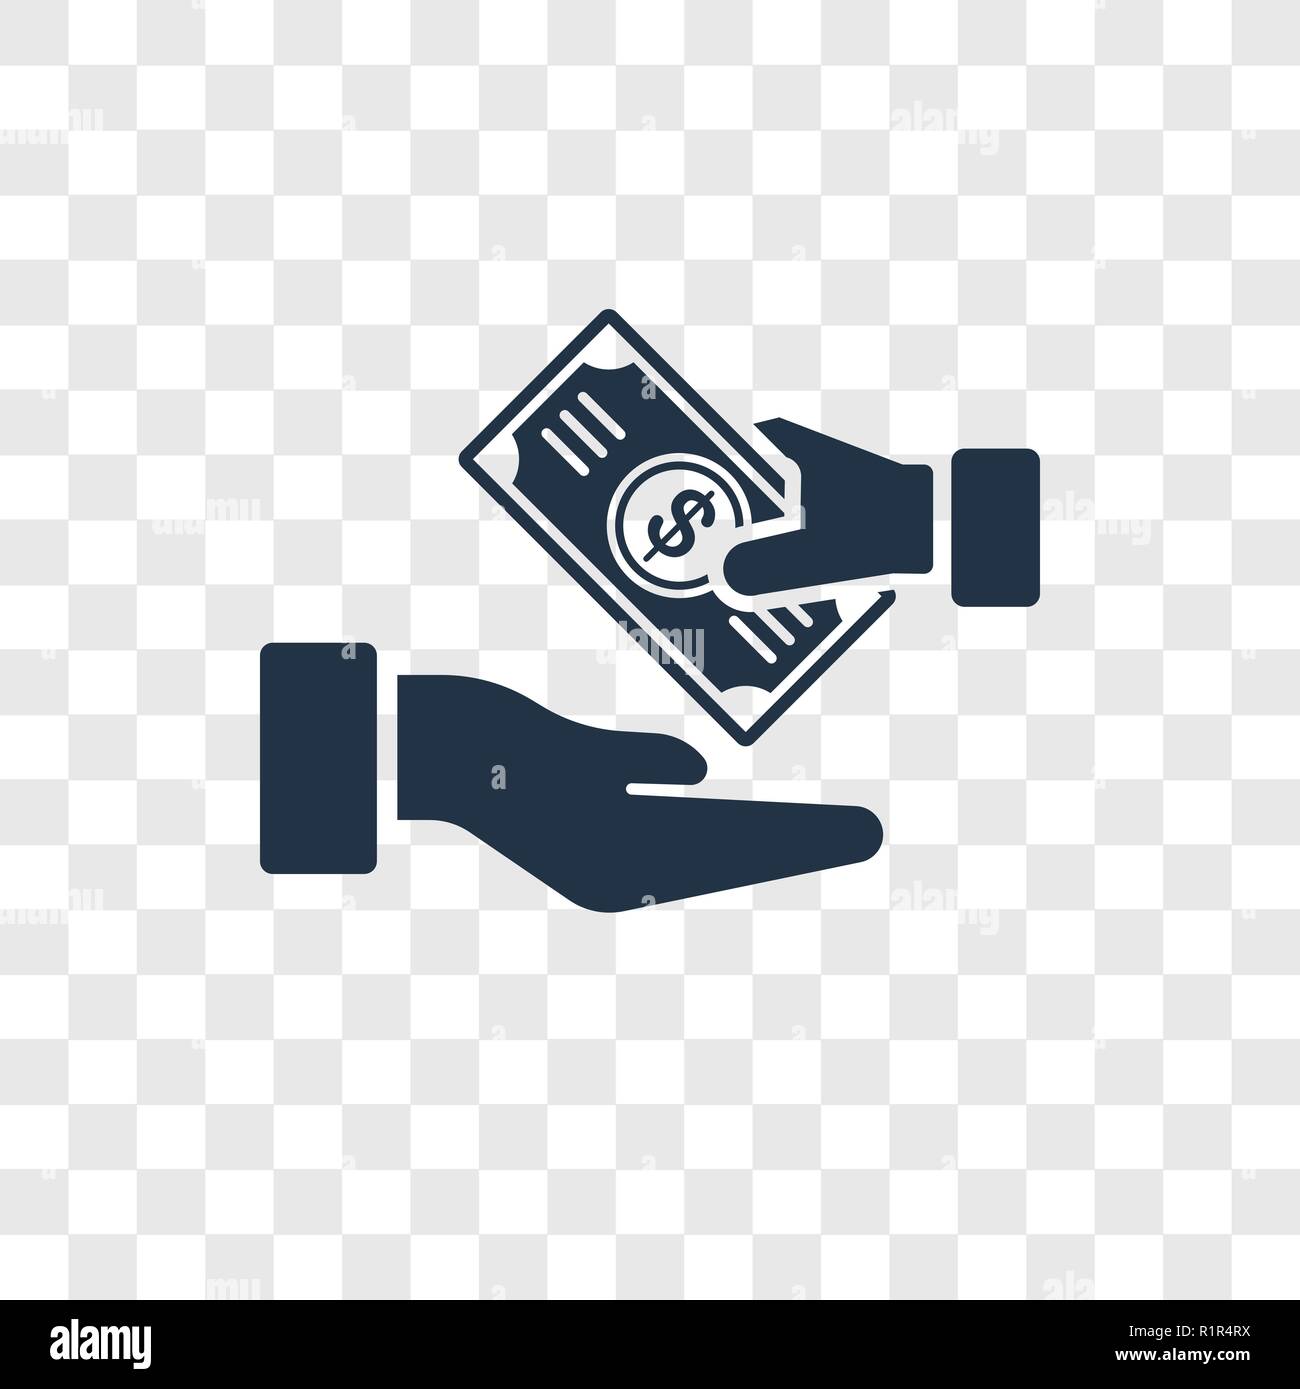 Money transfer vector icon isolated on transparent background, Money